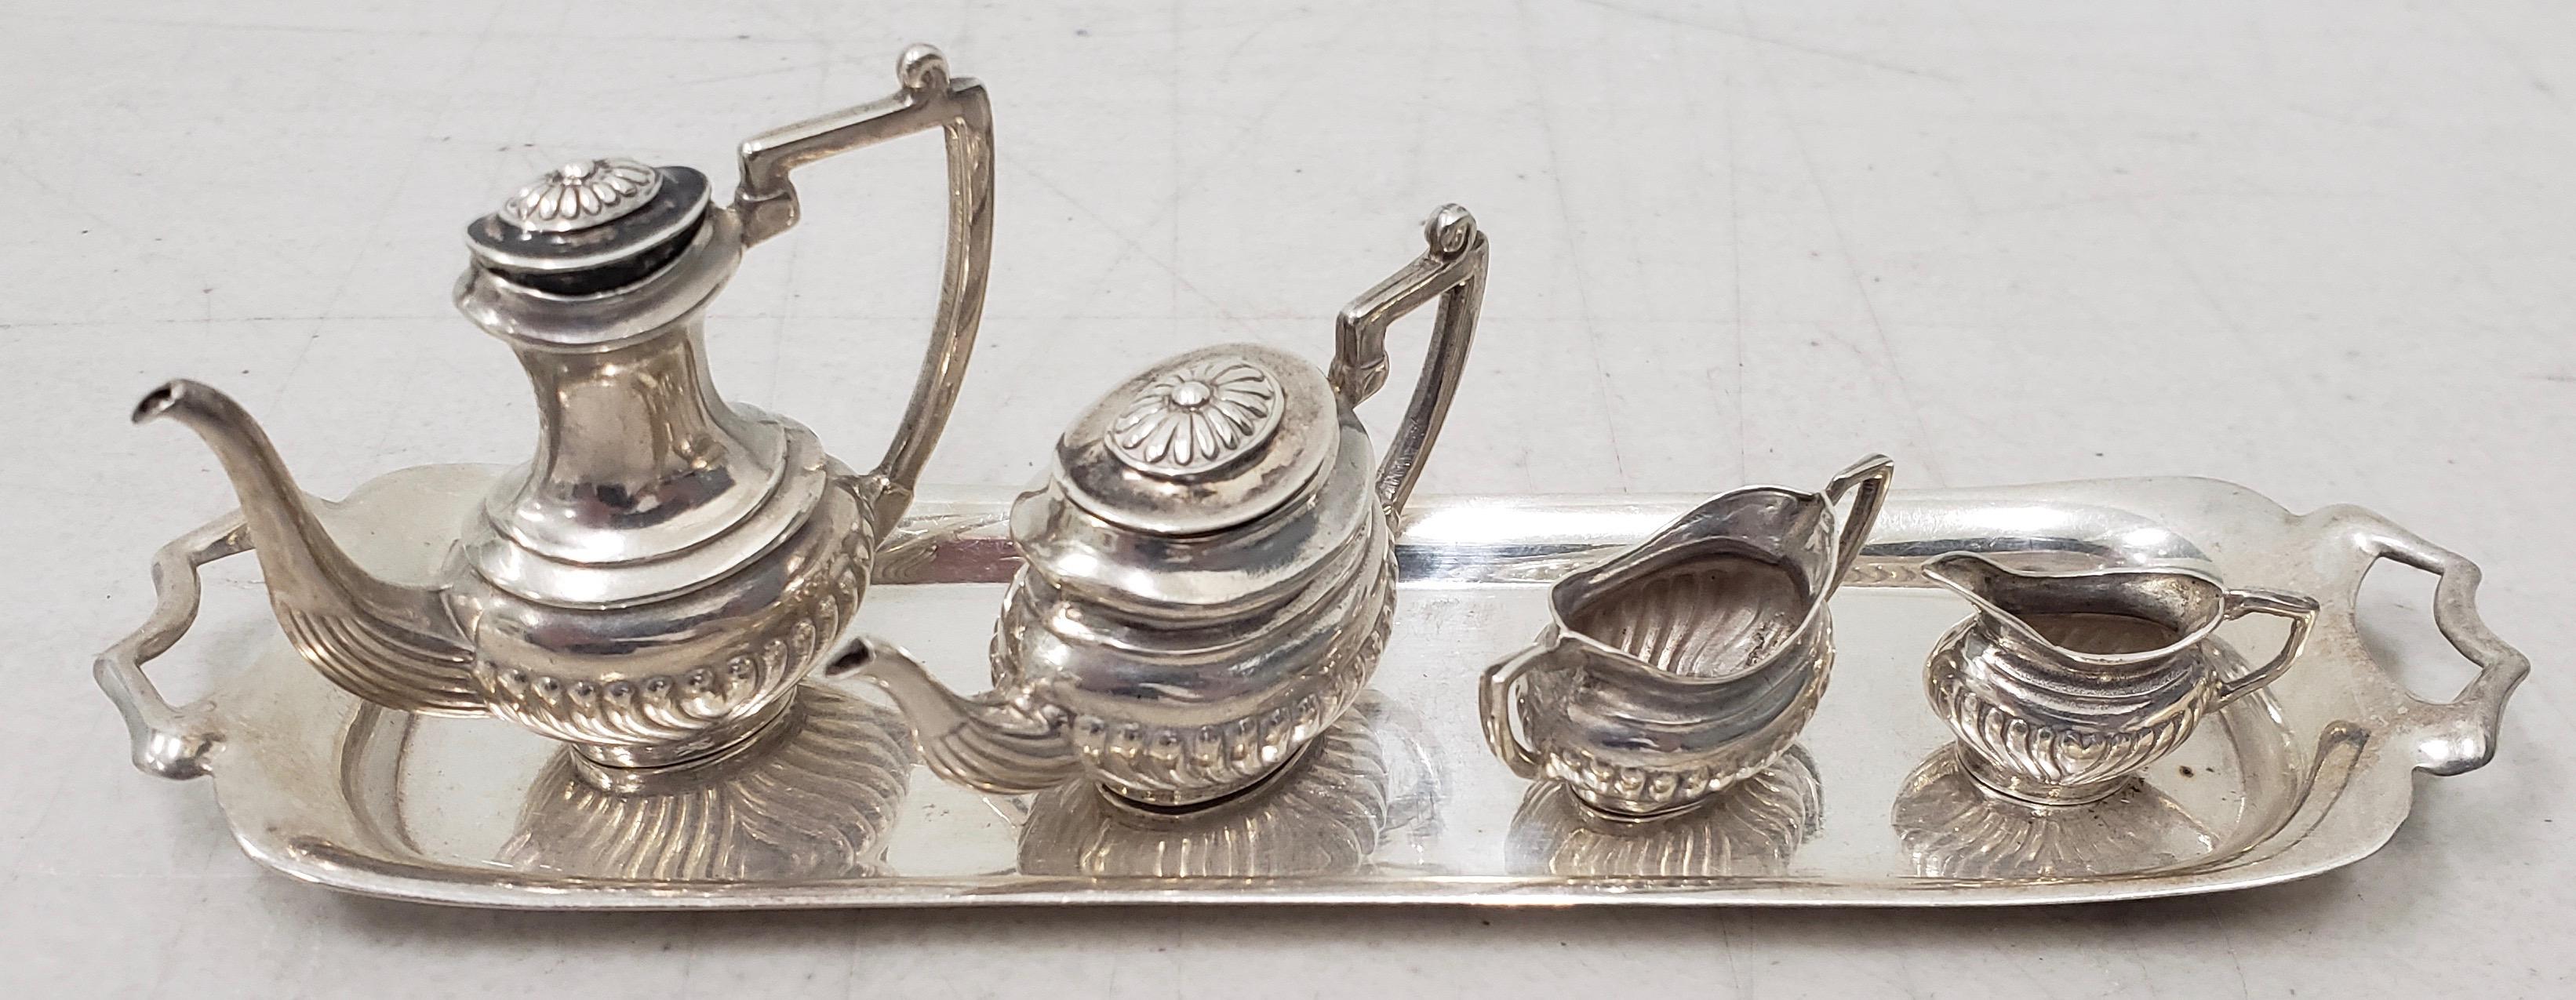 Miniature sterling coffee and tea set with British hallmarks

Charming sterling silver coffee and tea set with hallmarks.

Each piece is in excellent condition. The tray measures 6